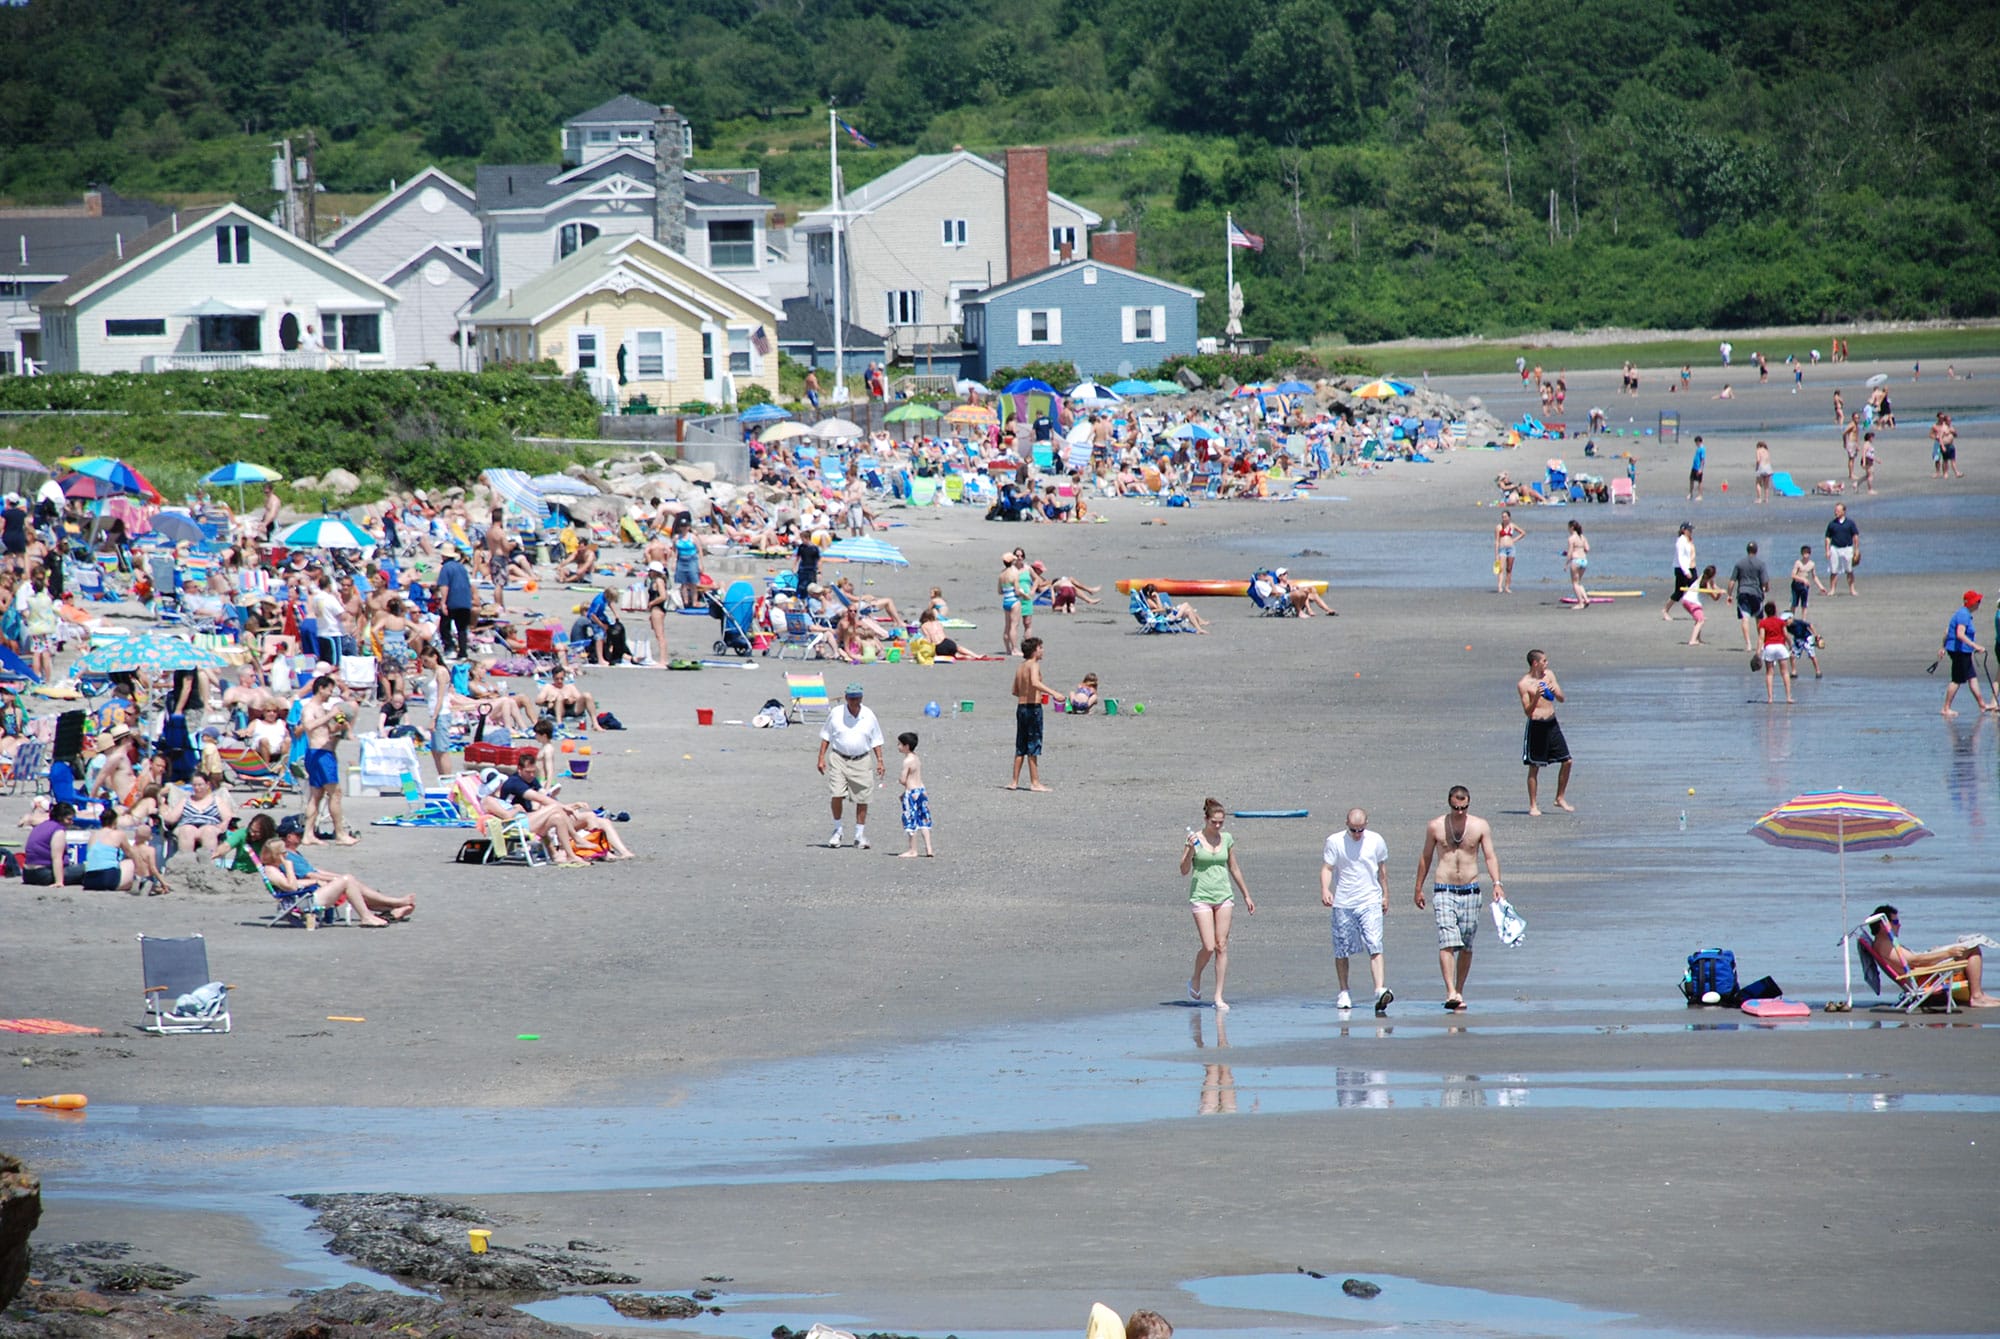 A crowd of people on a beach.